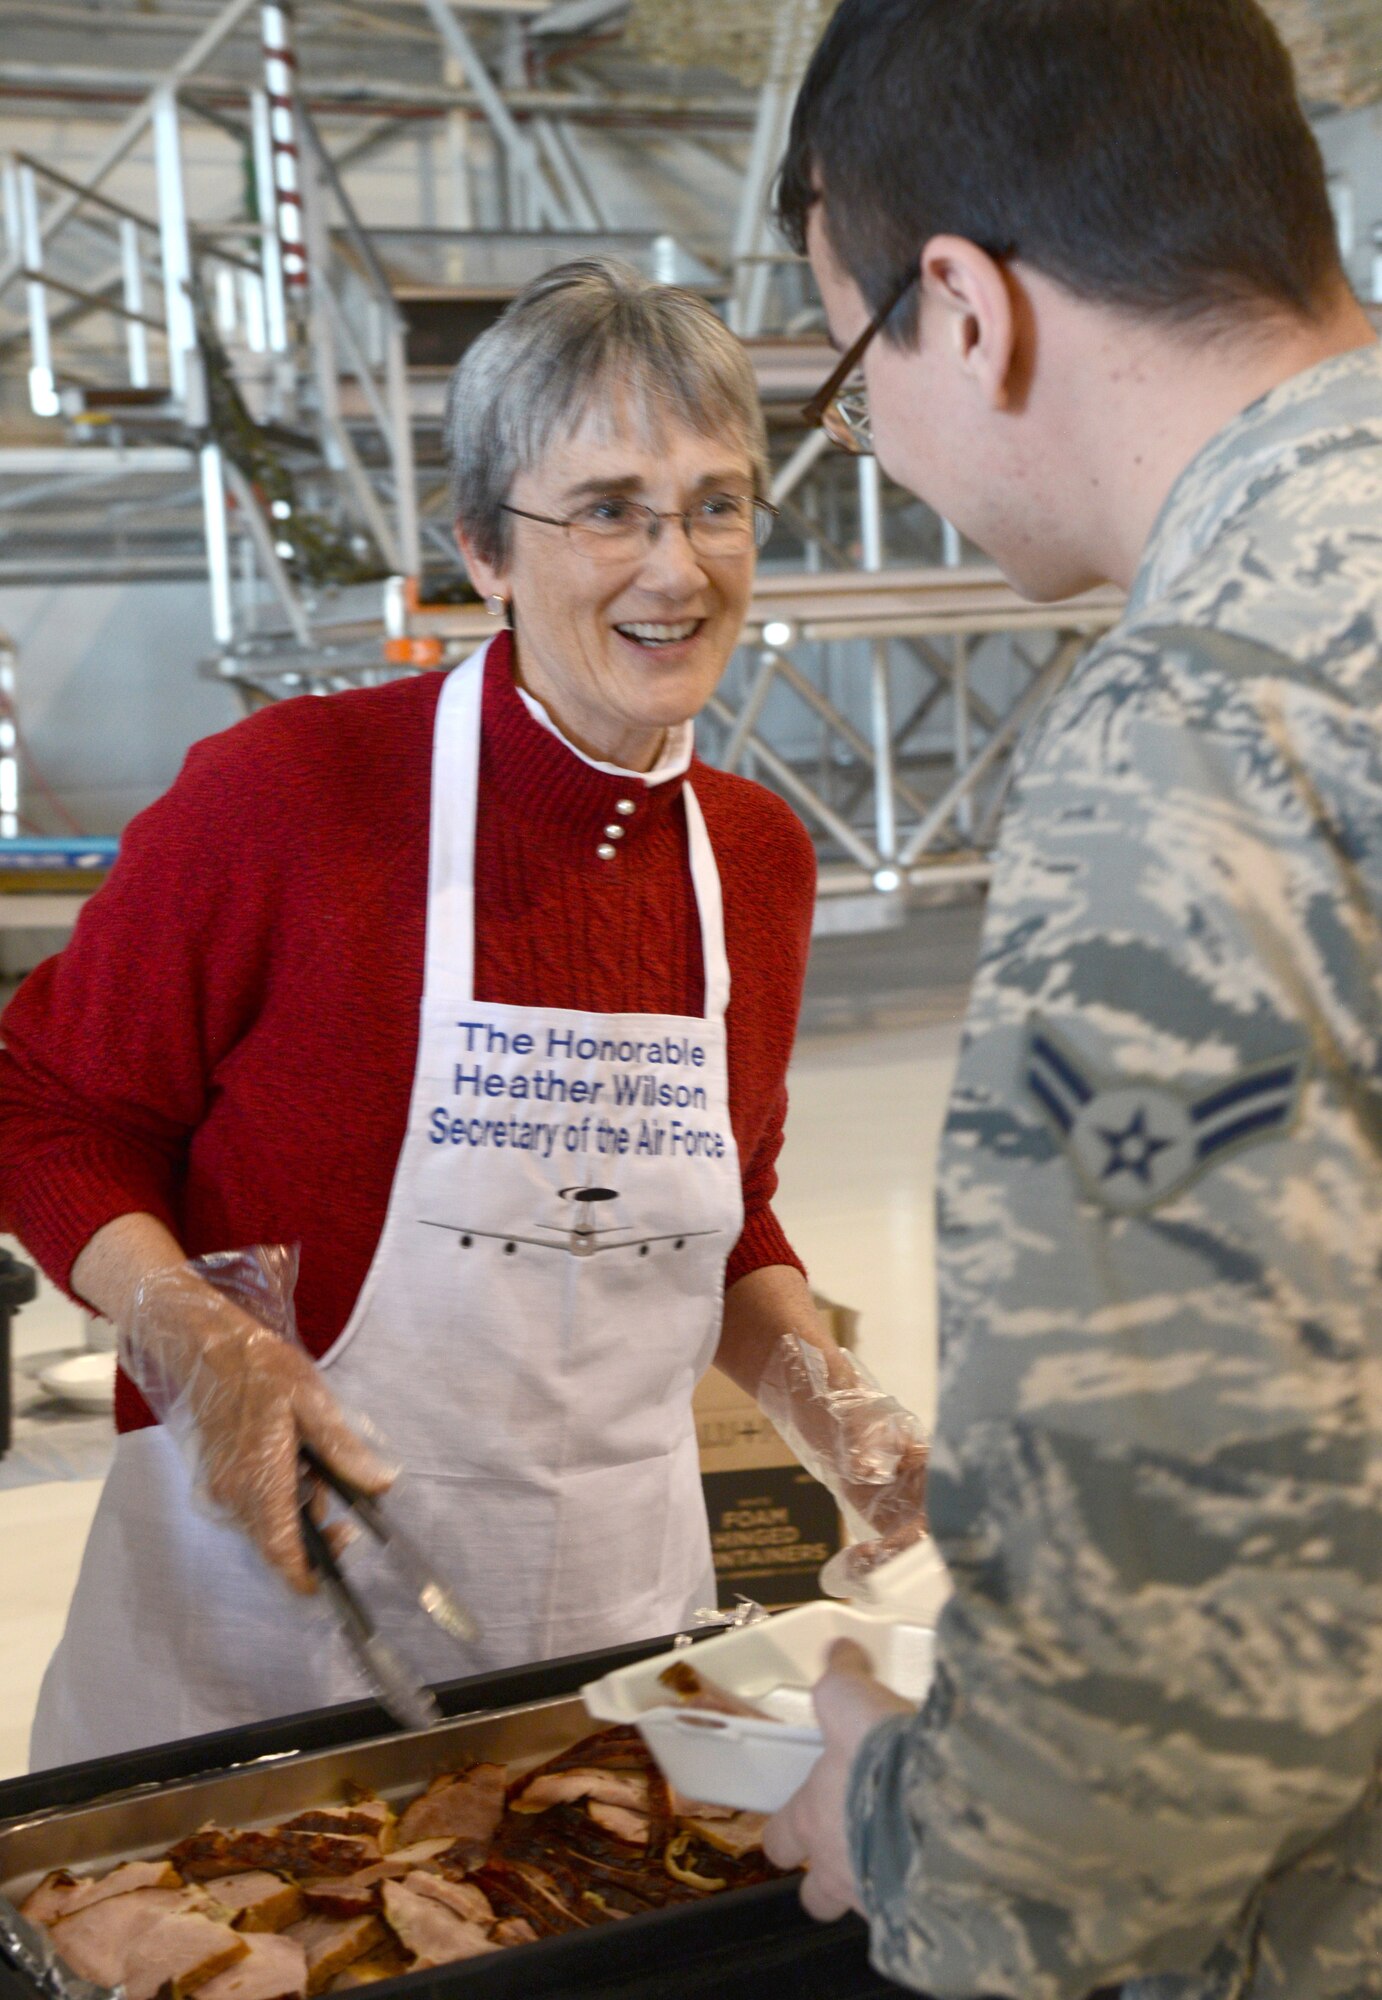 Secretary of the Air Force Heather Wilson took the opportunity to help serve Thanksgiving dinner to members of the 552nd Air Control Wing during her visit to Tinker Air Force Base Nov. 16. Wilson is shown here serving ham-slices to an Airman 1st Class of the 552nd ACW.